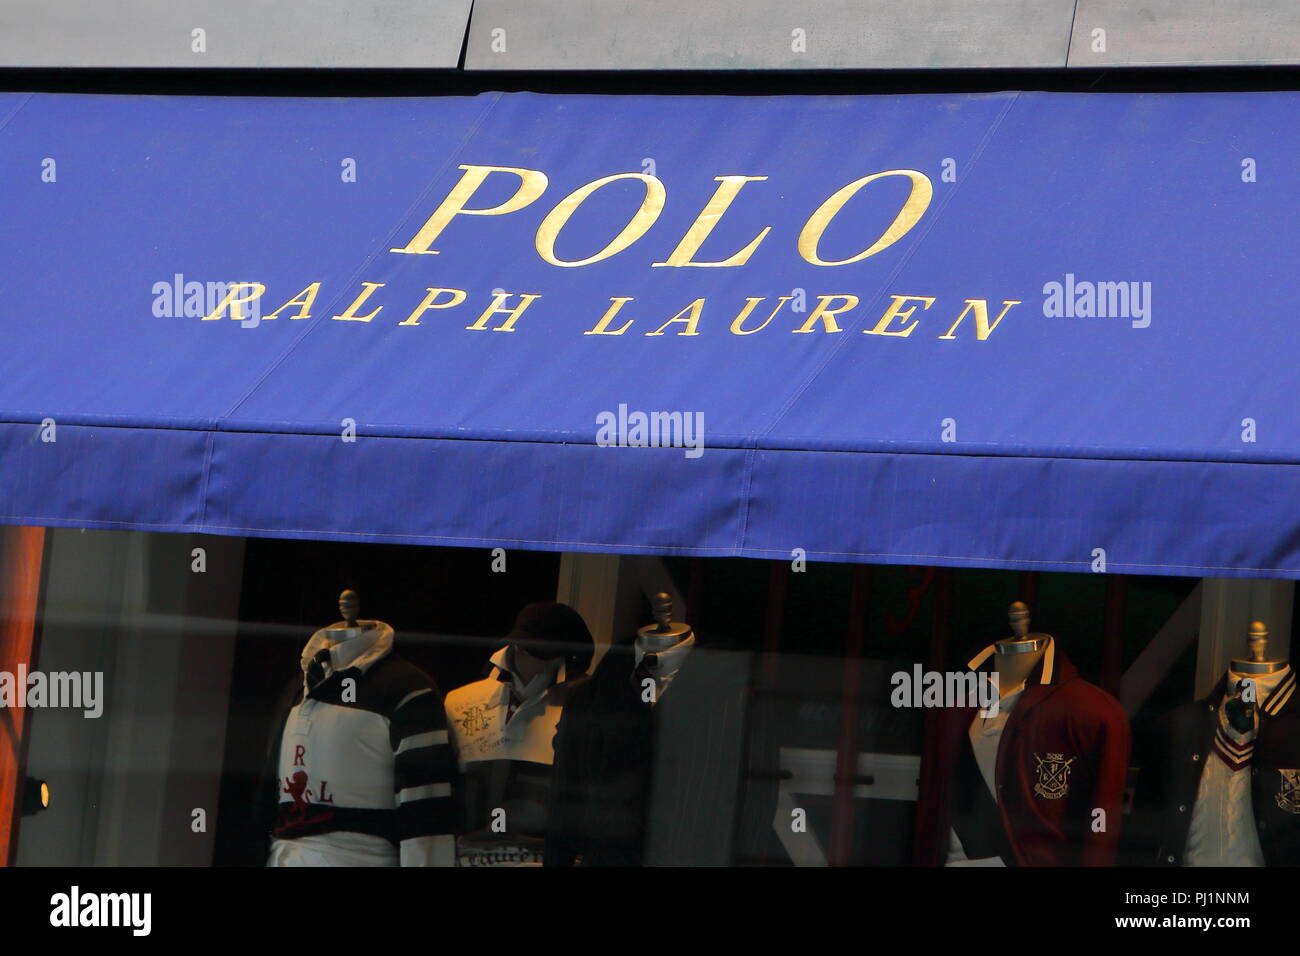 Signage above a Ralph Lauren Retail Outlet in Regent Street, London, UK  Stock Photo - Alamy